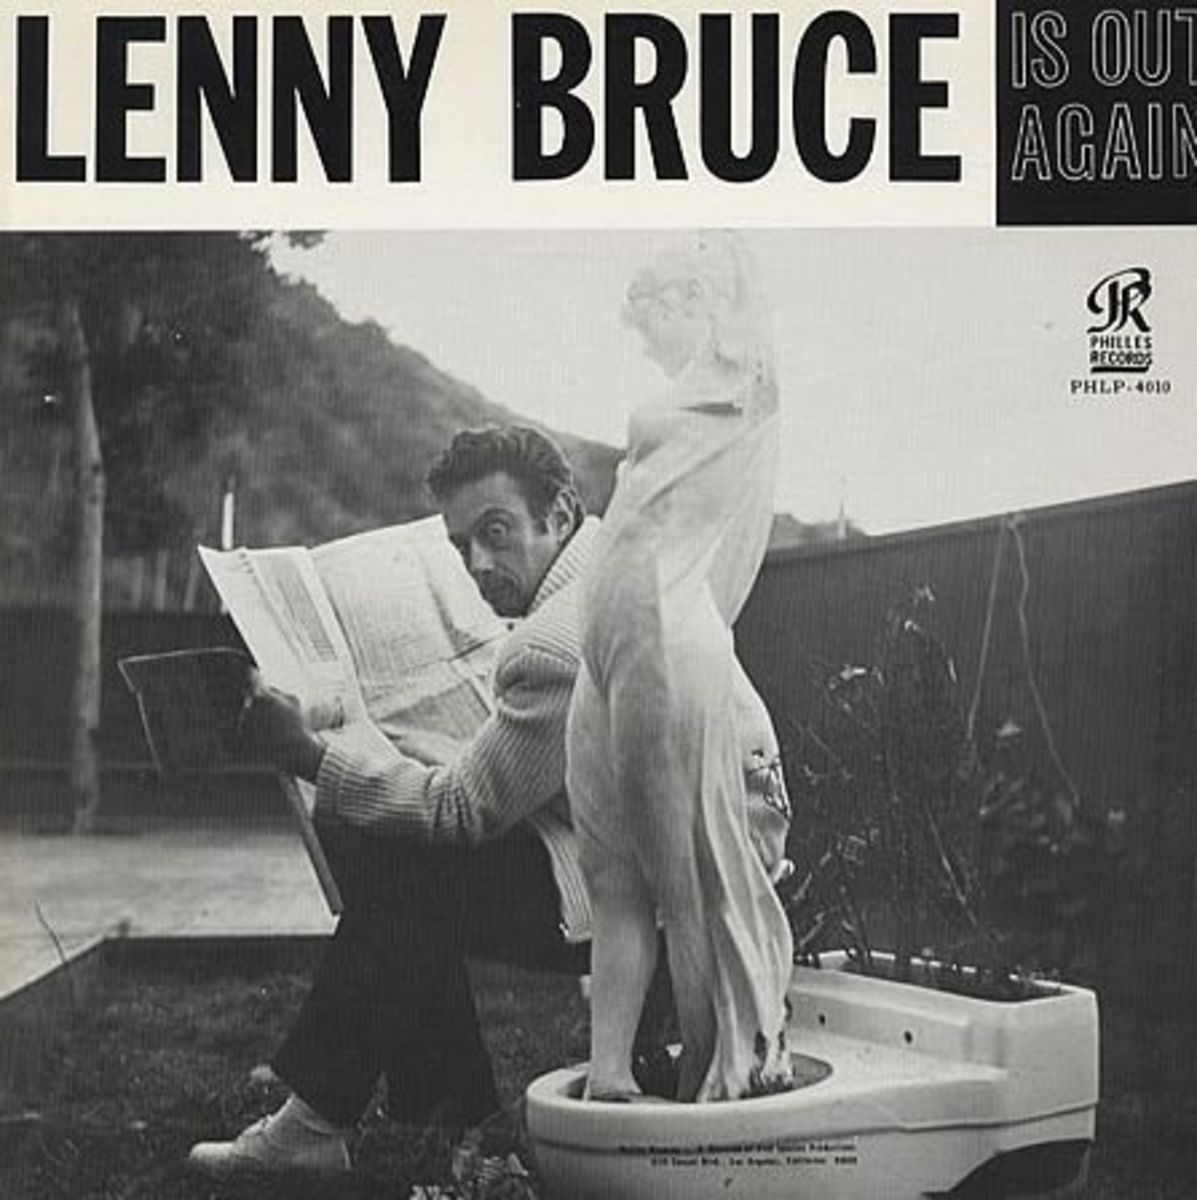 Lenny Bruce "Is Out Again" Philles Records PHLP  4010 12" LP Vinyl Record, US Pressing (1966) Live Recordings 1965